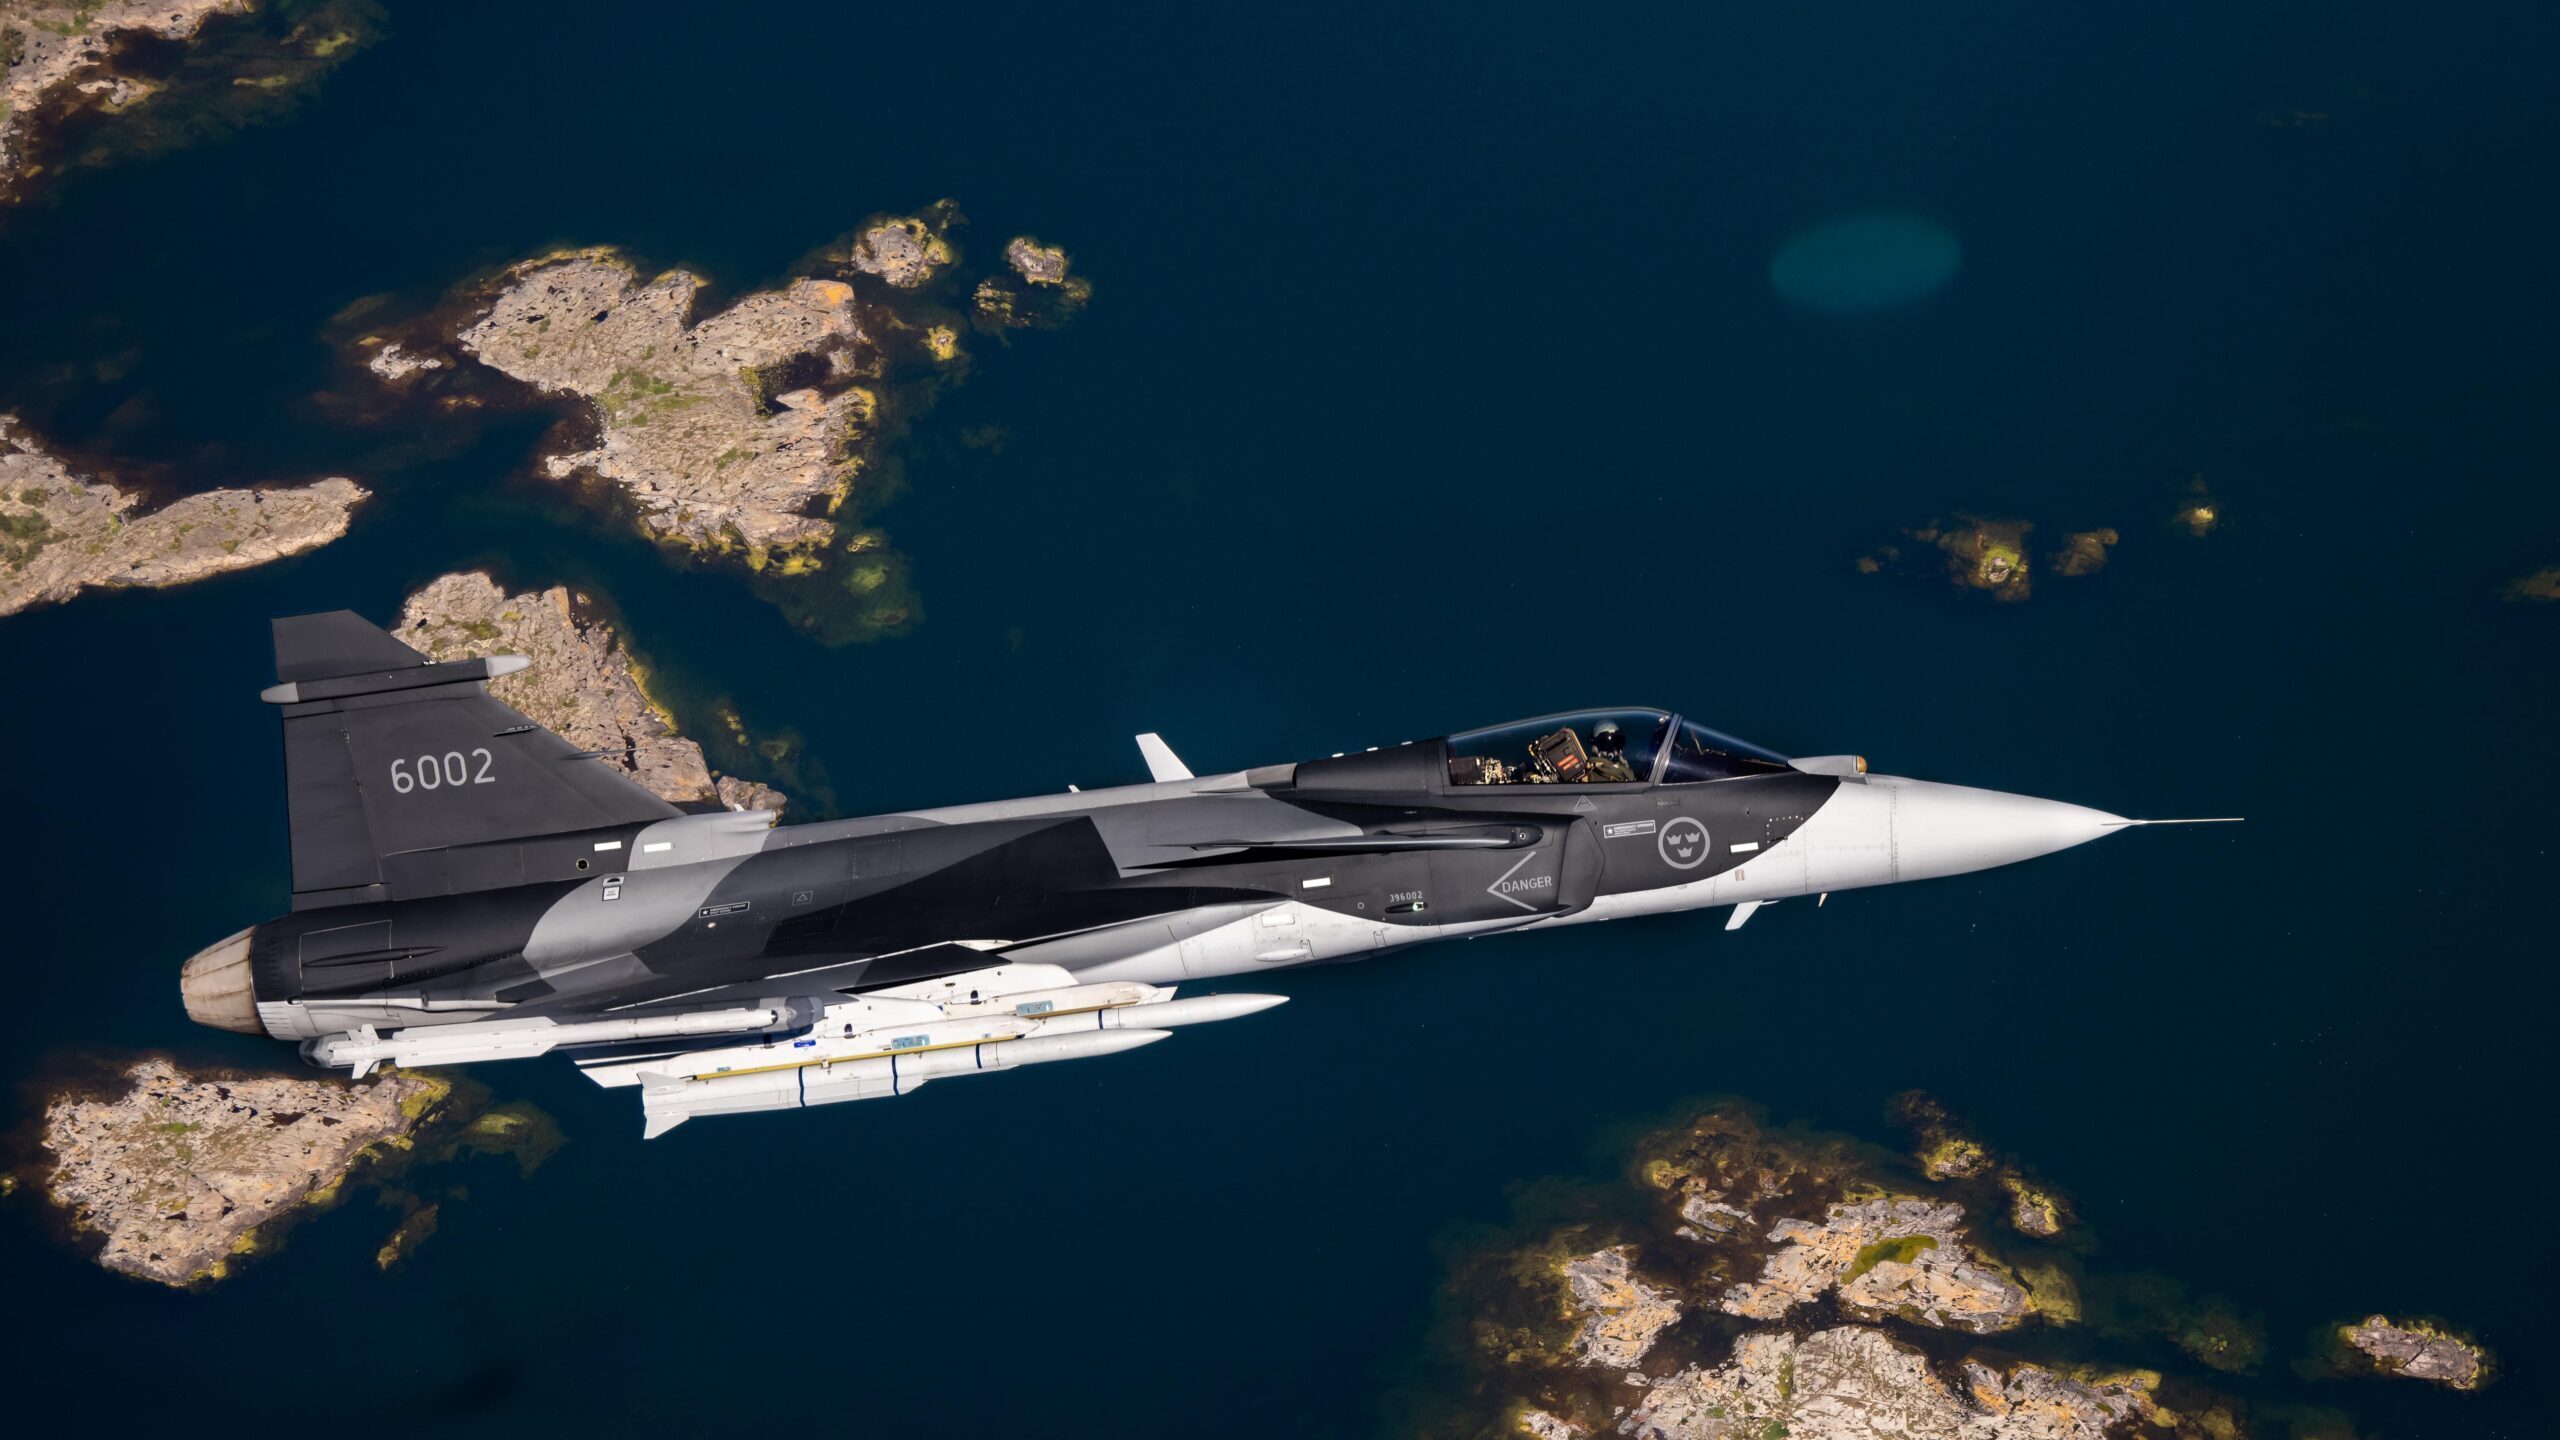 Sweden commissions study on Gripen fighter jet satellite launch capability